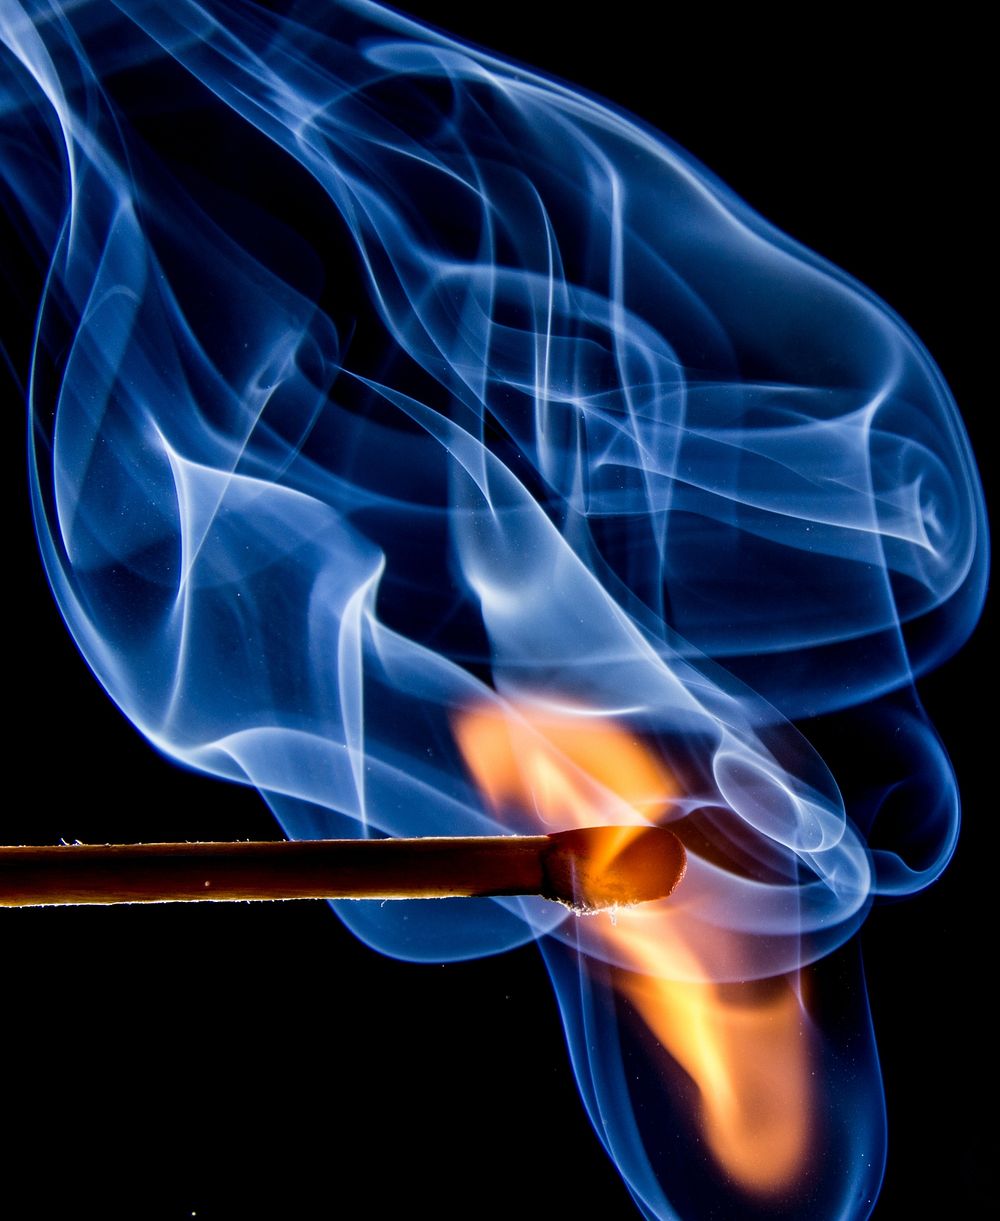 Lighting a match, blue flame, closeup. View public domain image source here